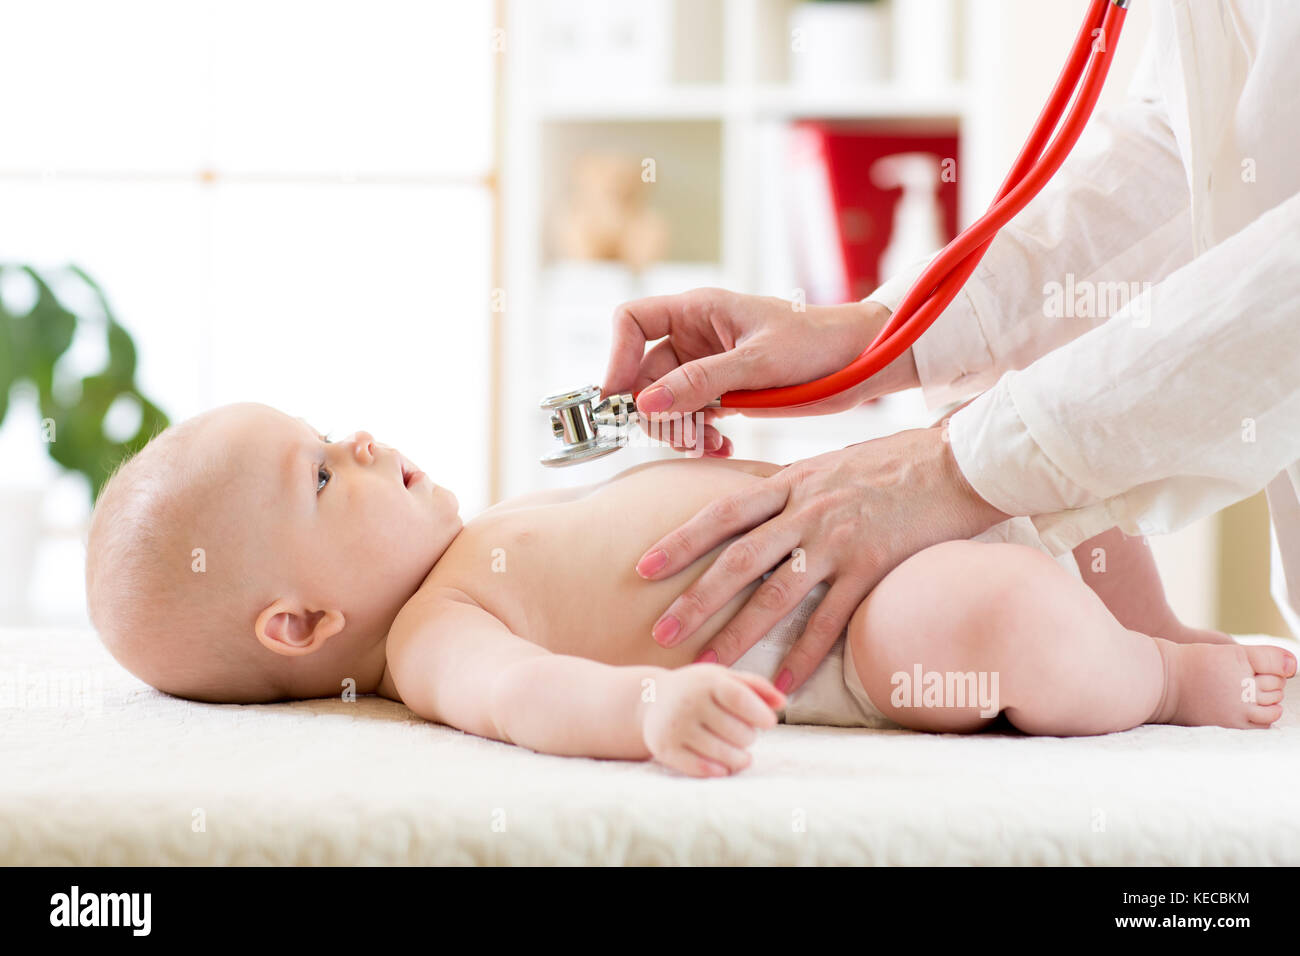 Stethoscope listening to baby's heart beat or lungs Stock Photo - Alamy